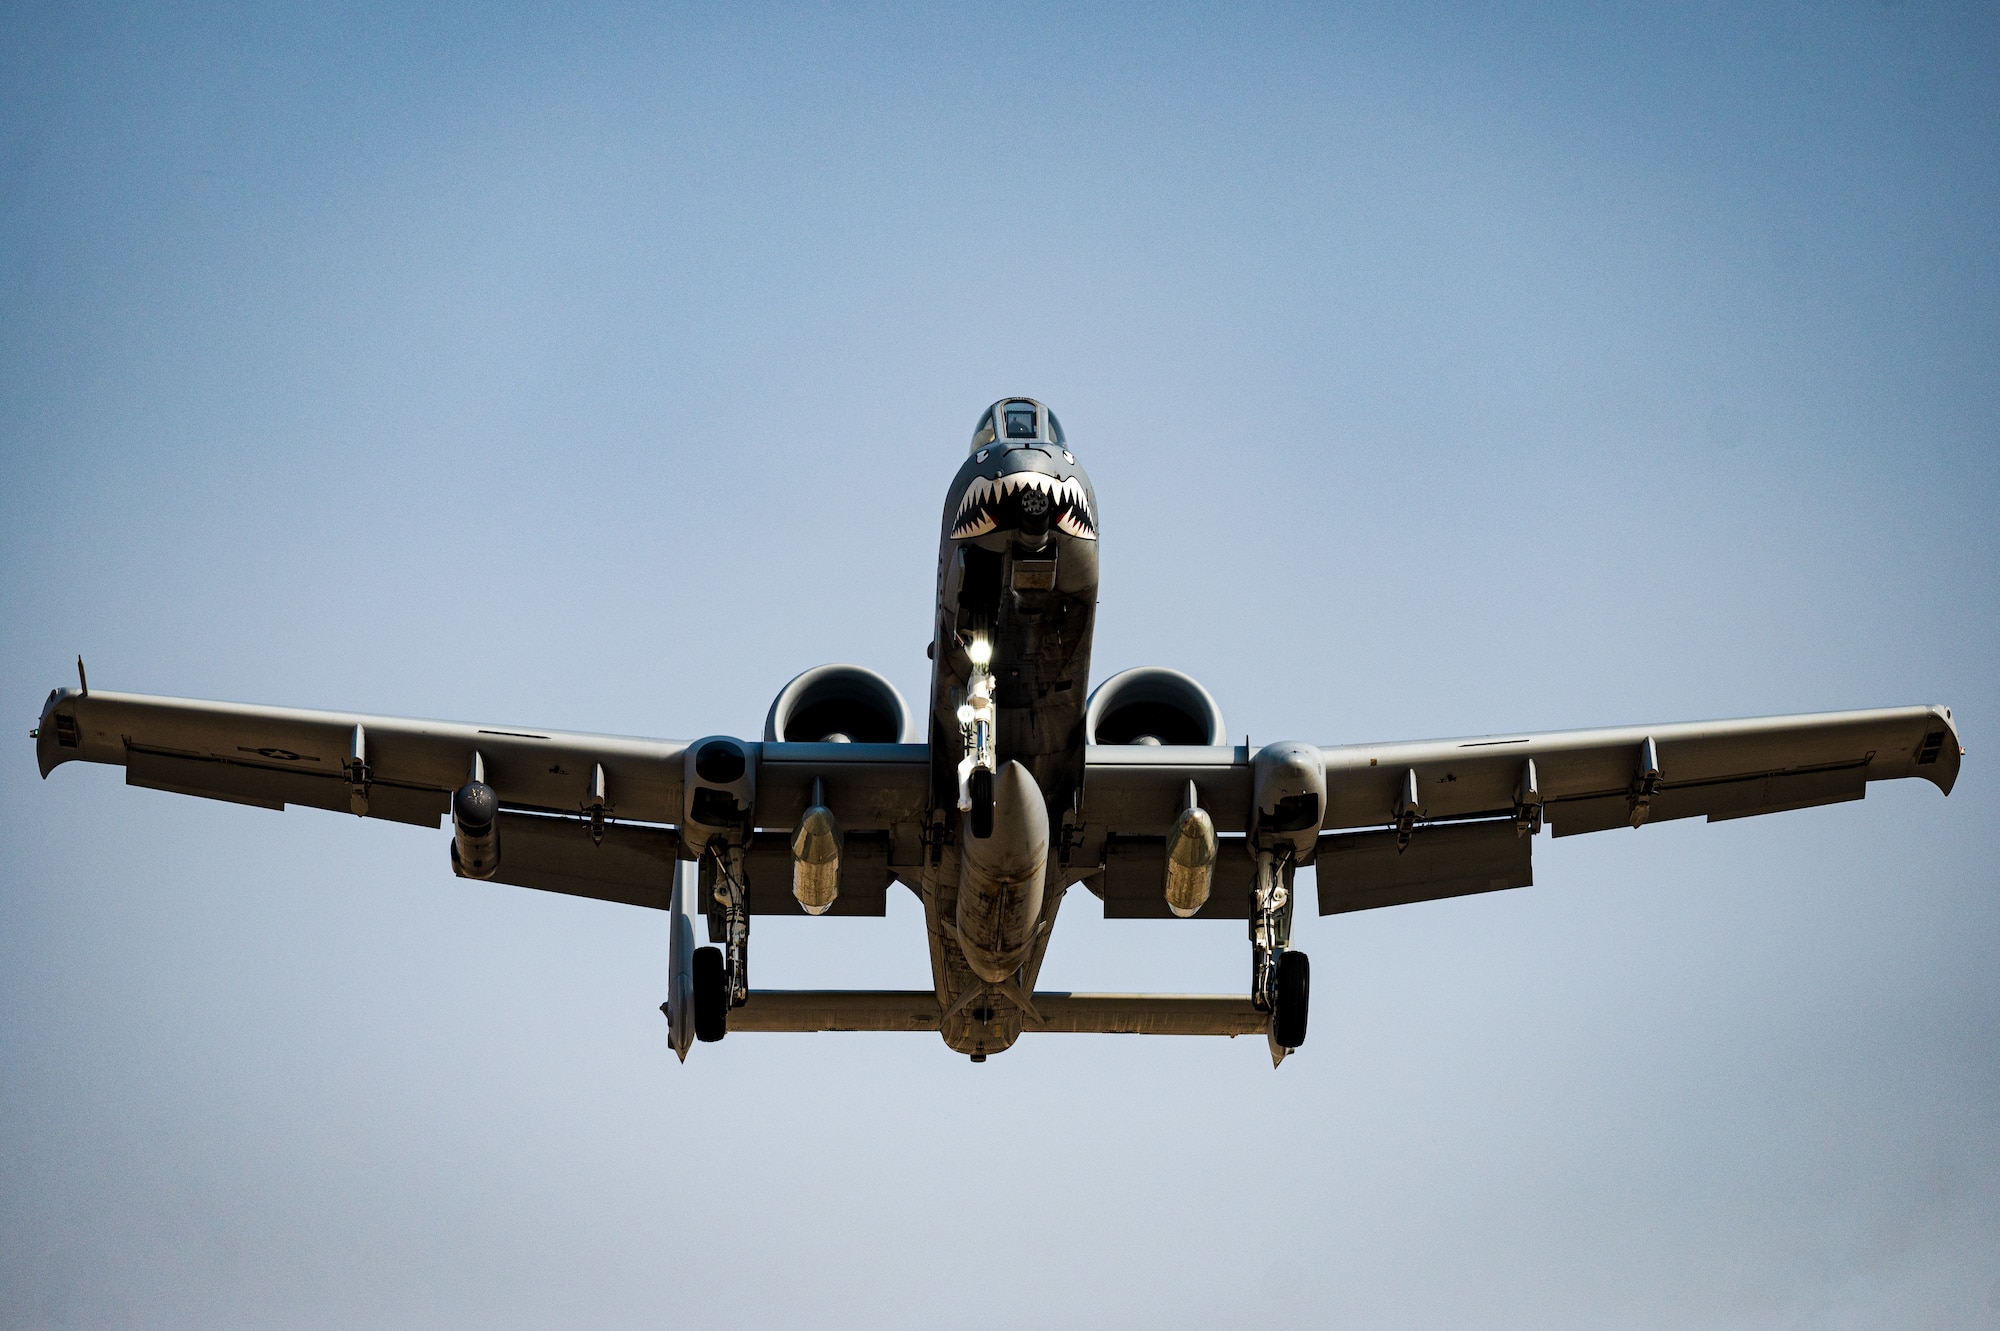 The first A-10 Thunderbolt II from the 75th Expeditionary Fighter Squadron approaches for landing at Al Dhafra Air Base, United Arab Emirates, March 31, 2023. The arrival of the 75th EFS and the 75th Expeditionary Fighter Generation Squadron will provide additional capabilities in close air support within the U.S. Central Command area of responsibility.  (U.S. Air Force photo by Staff Sgt. Sabatino DiMascio)